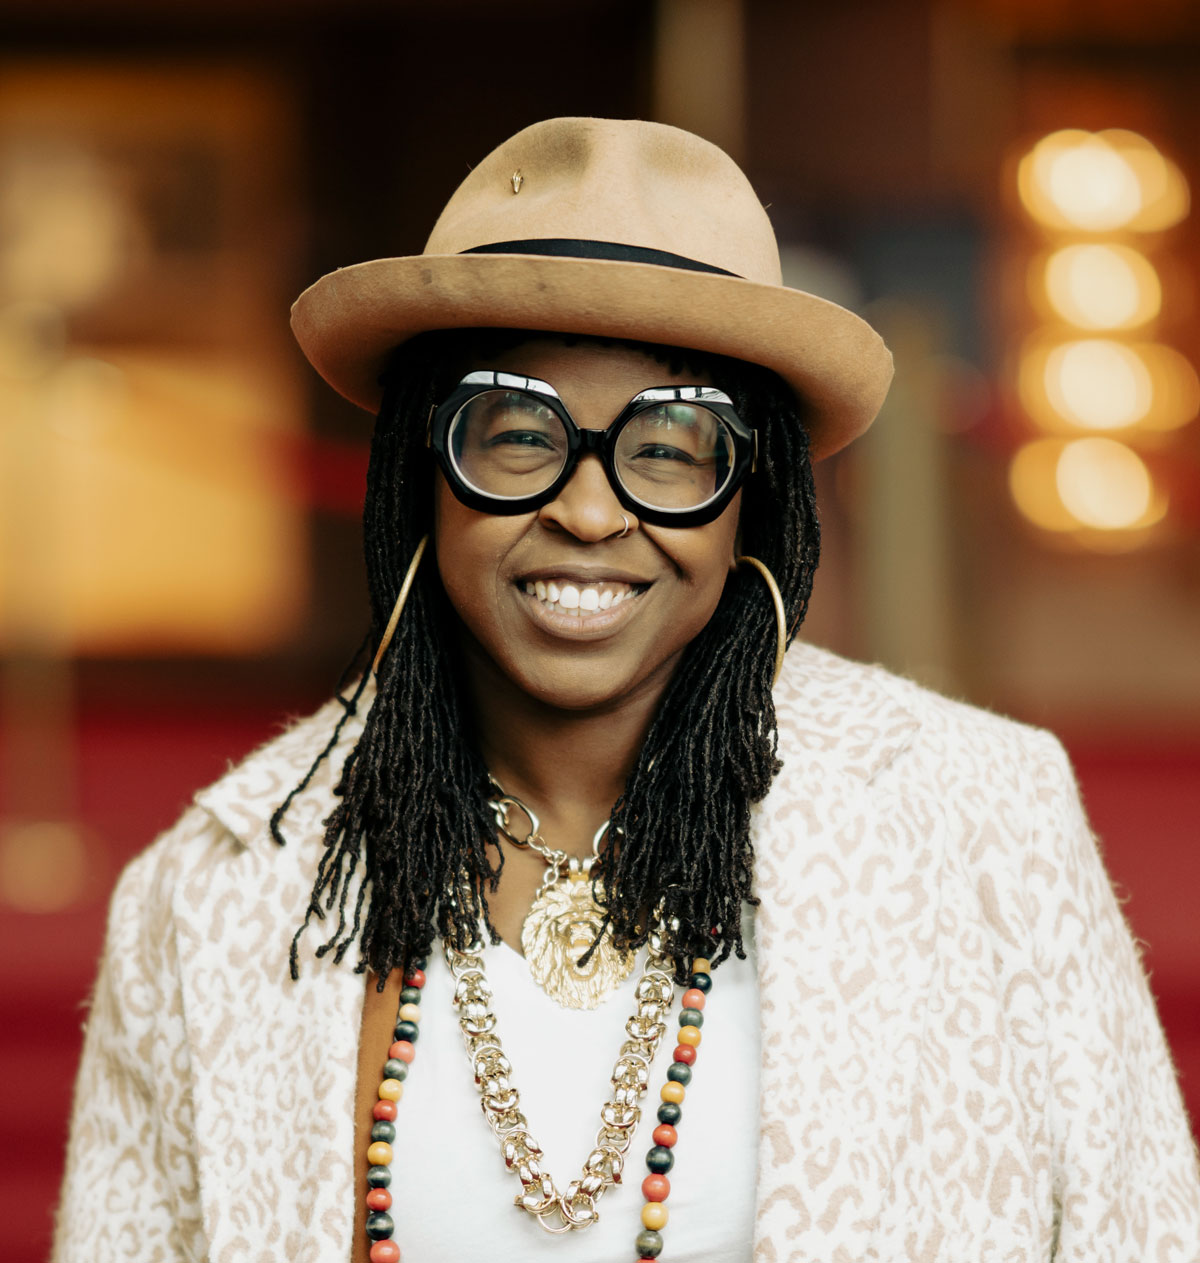 Photo of Beatrice Thomas, a queer Black interdisciplinary artist, wearing a short rimmed beige hat and large eyeglasses.